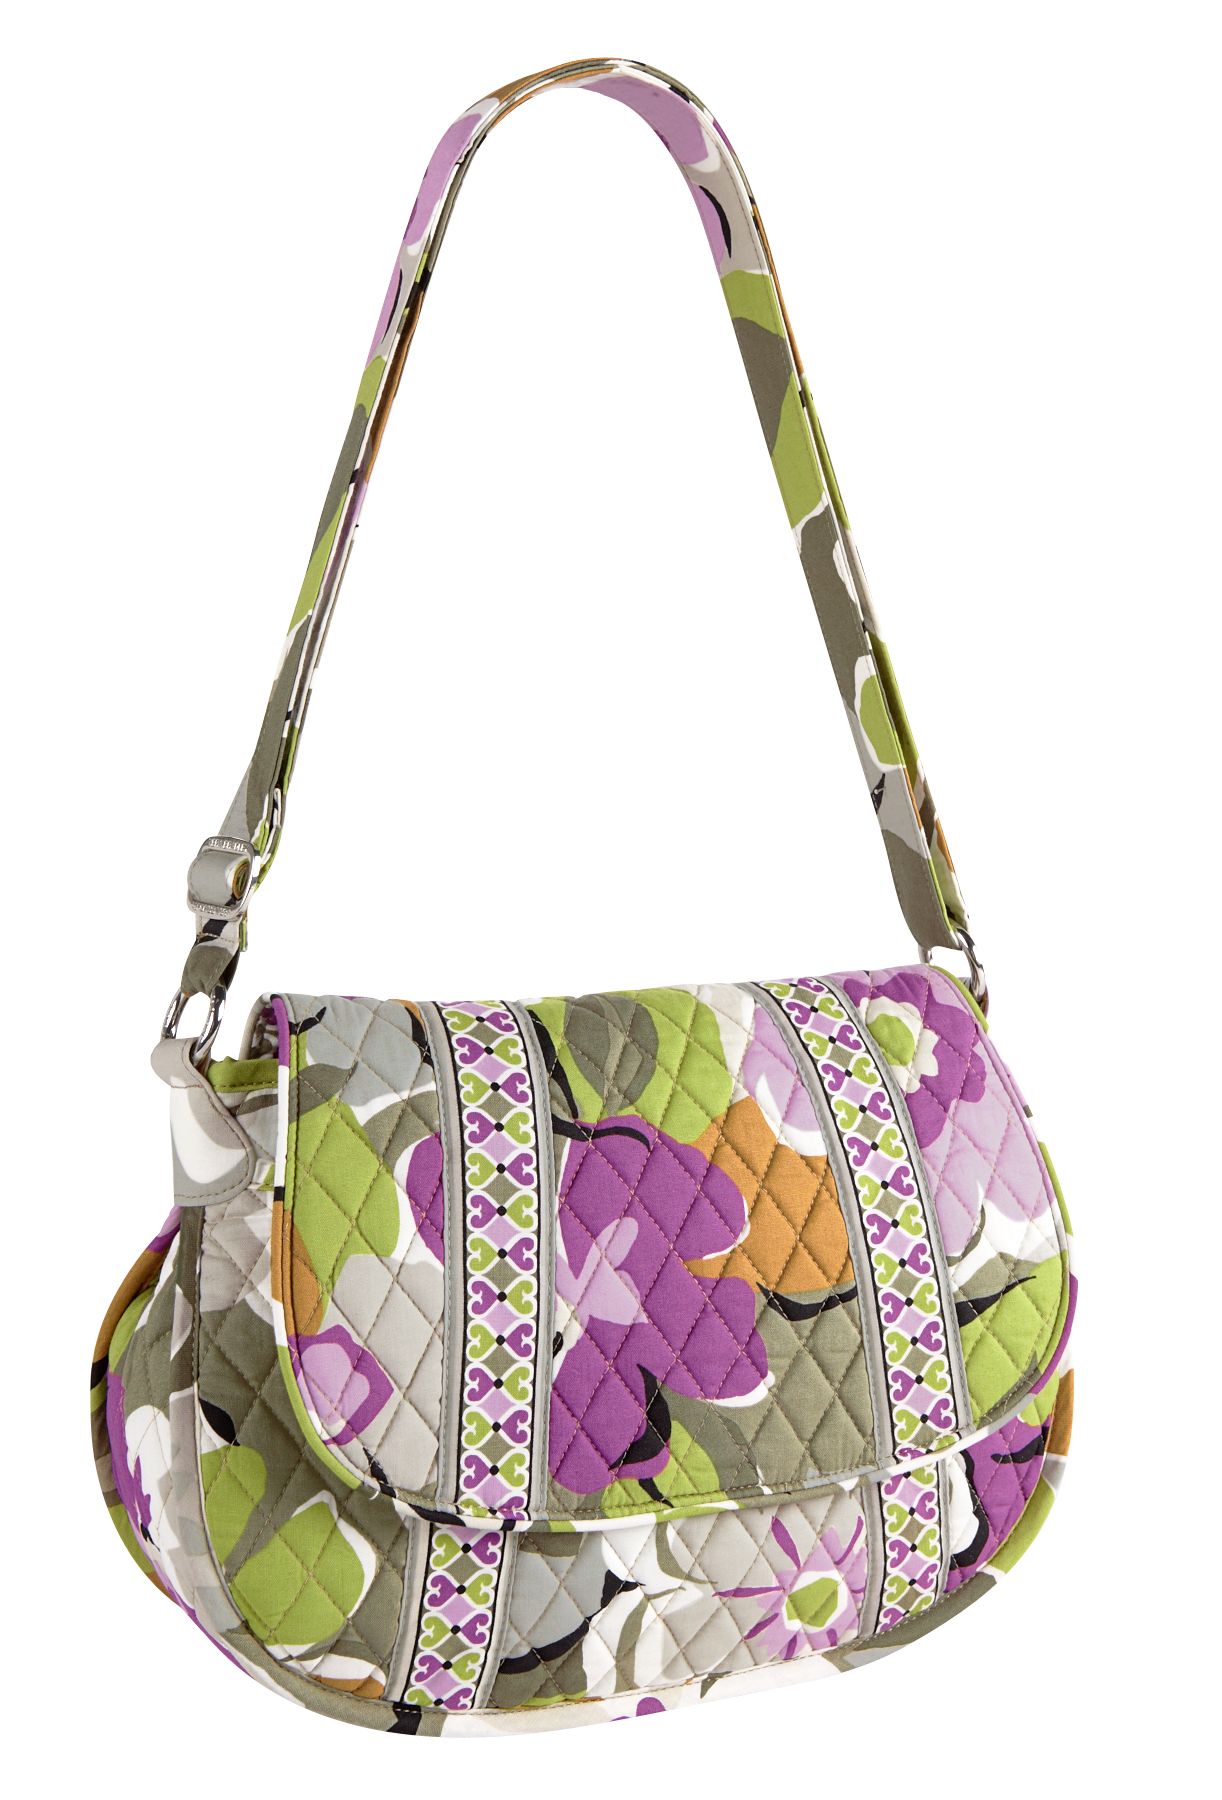 Vera Bradley Online Clearance #DEALS 70% Off and more